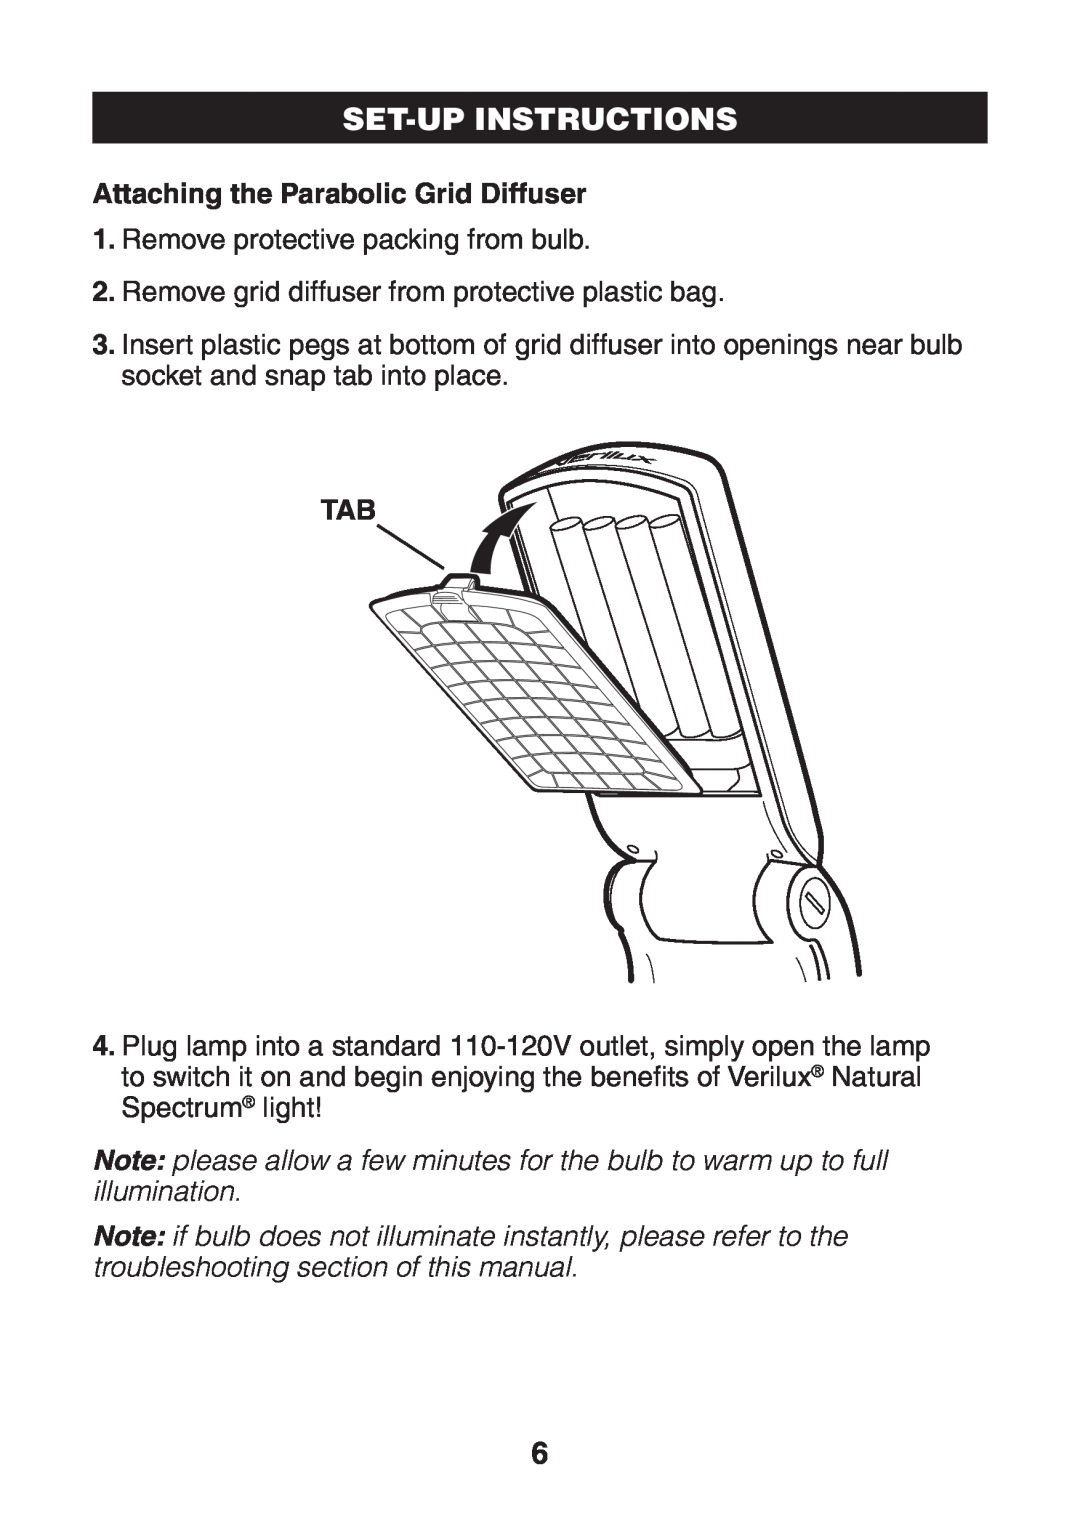 Verilux VP02 manual Set-Upinstructions, Attaching the Parabolic Grid Diffuser 